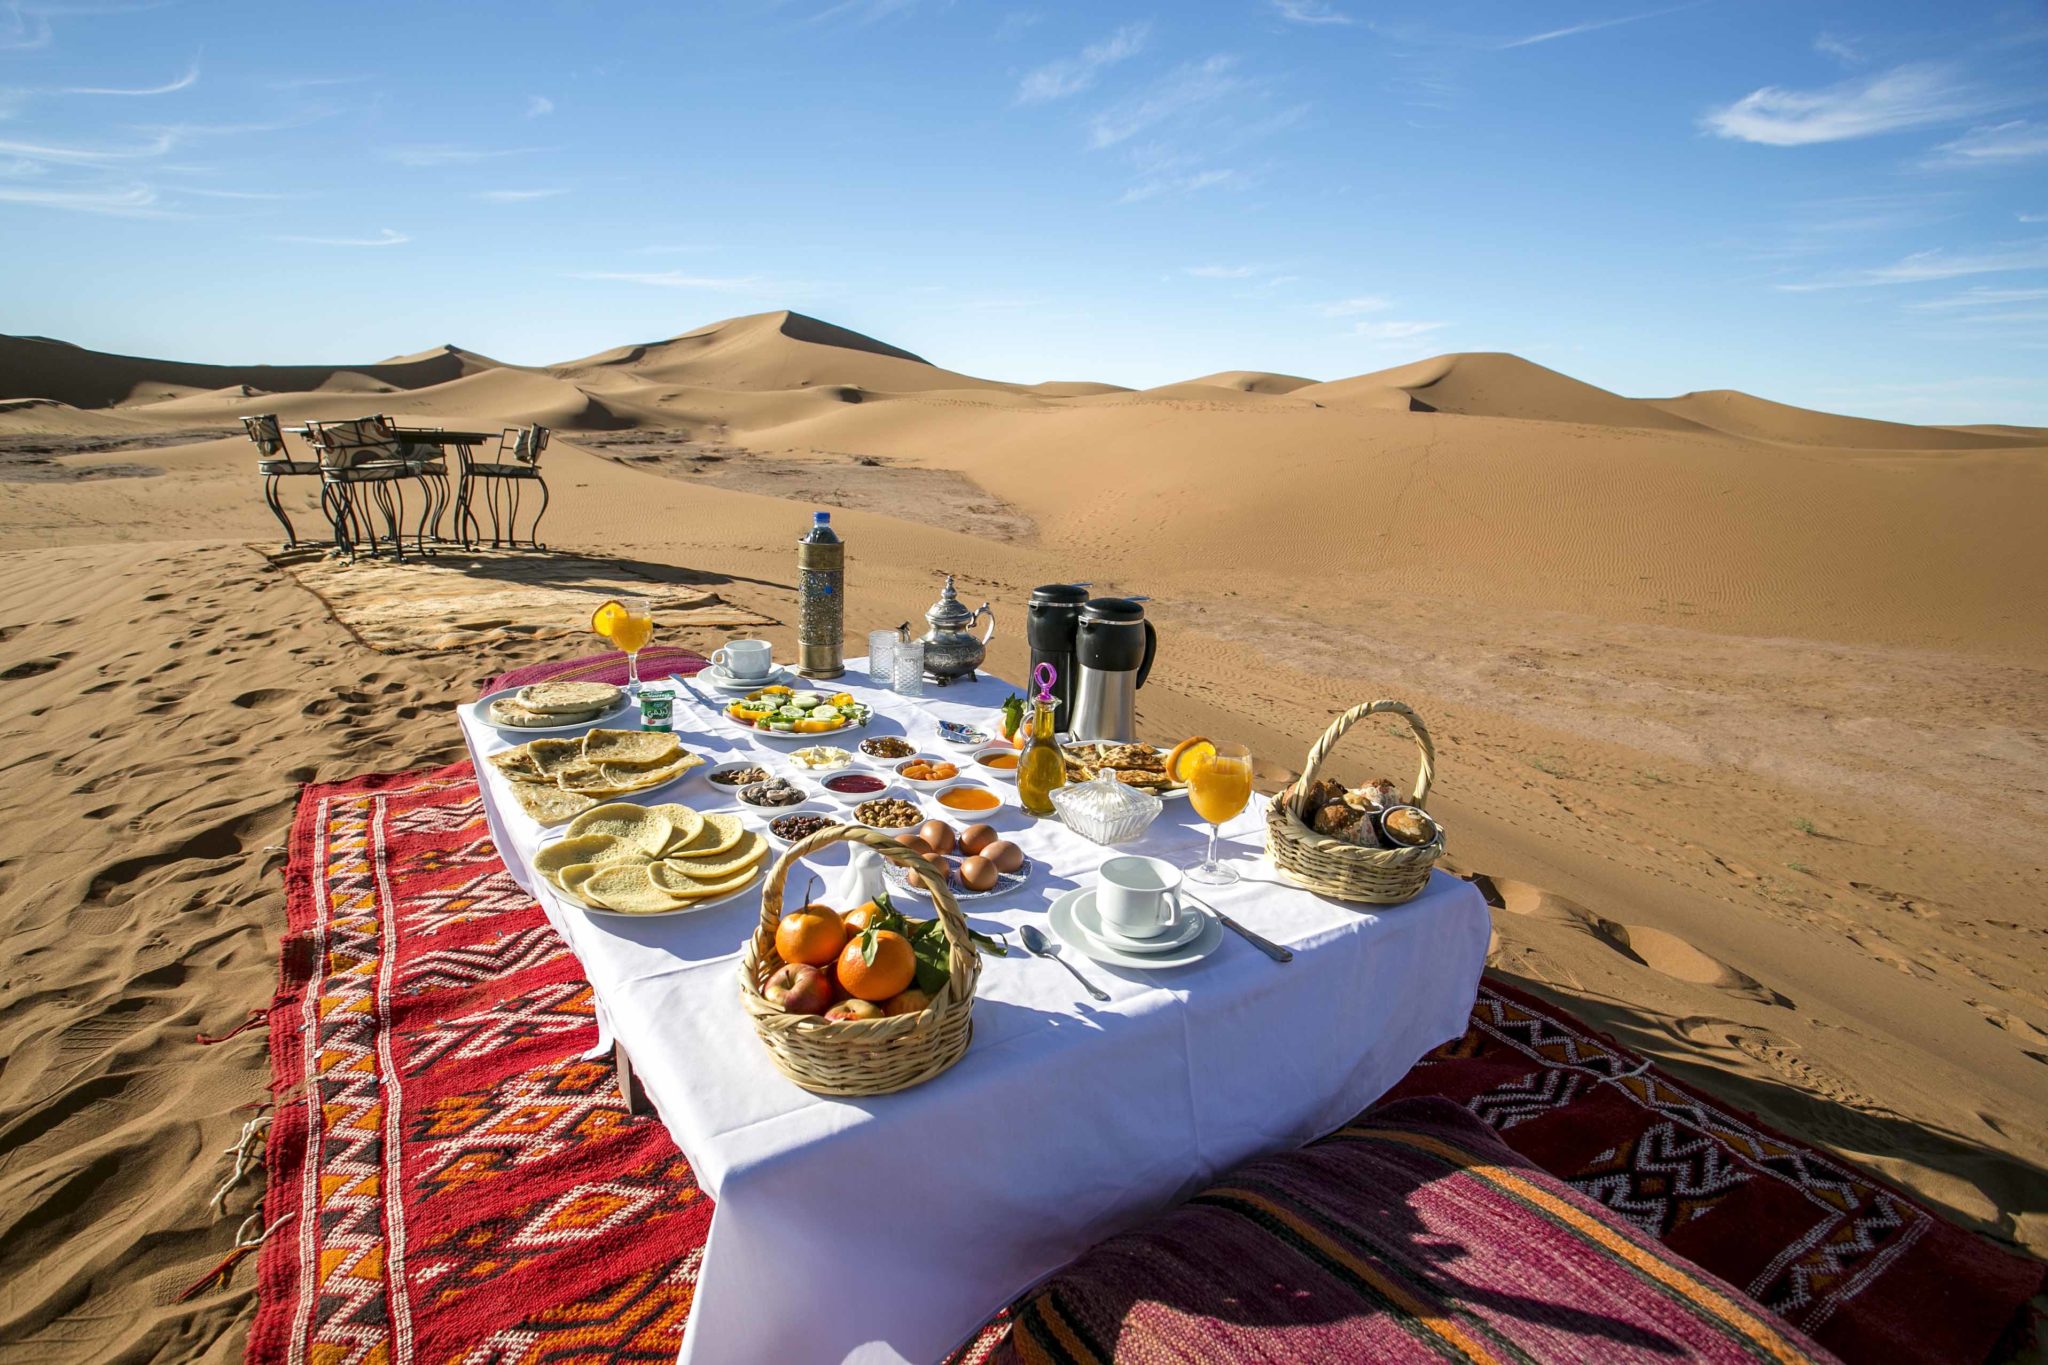 Incentives corporate business travel in Morocco for groups companies team building